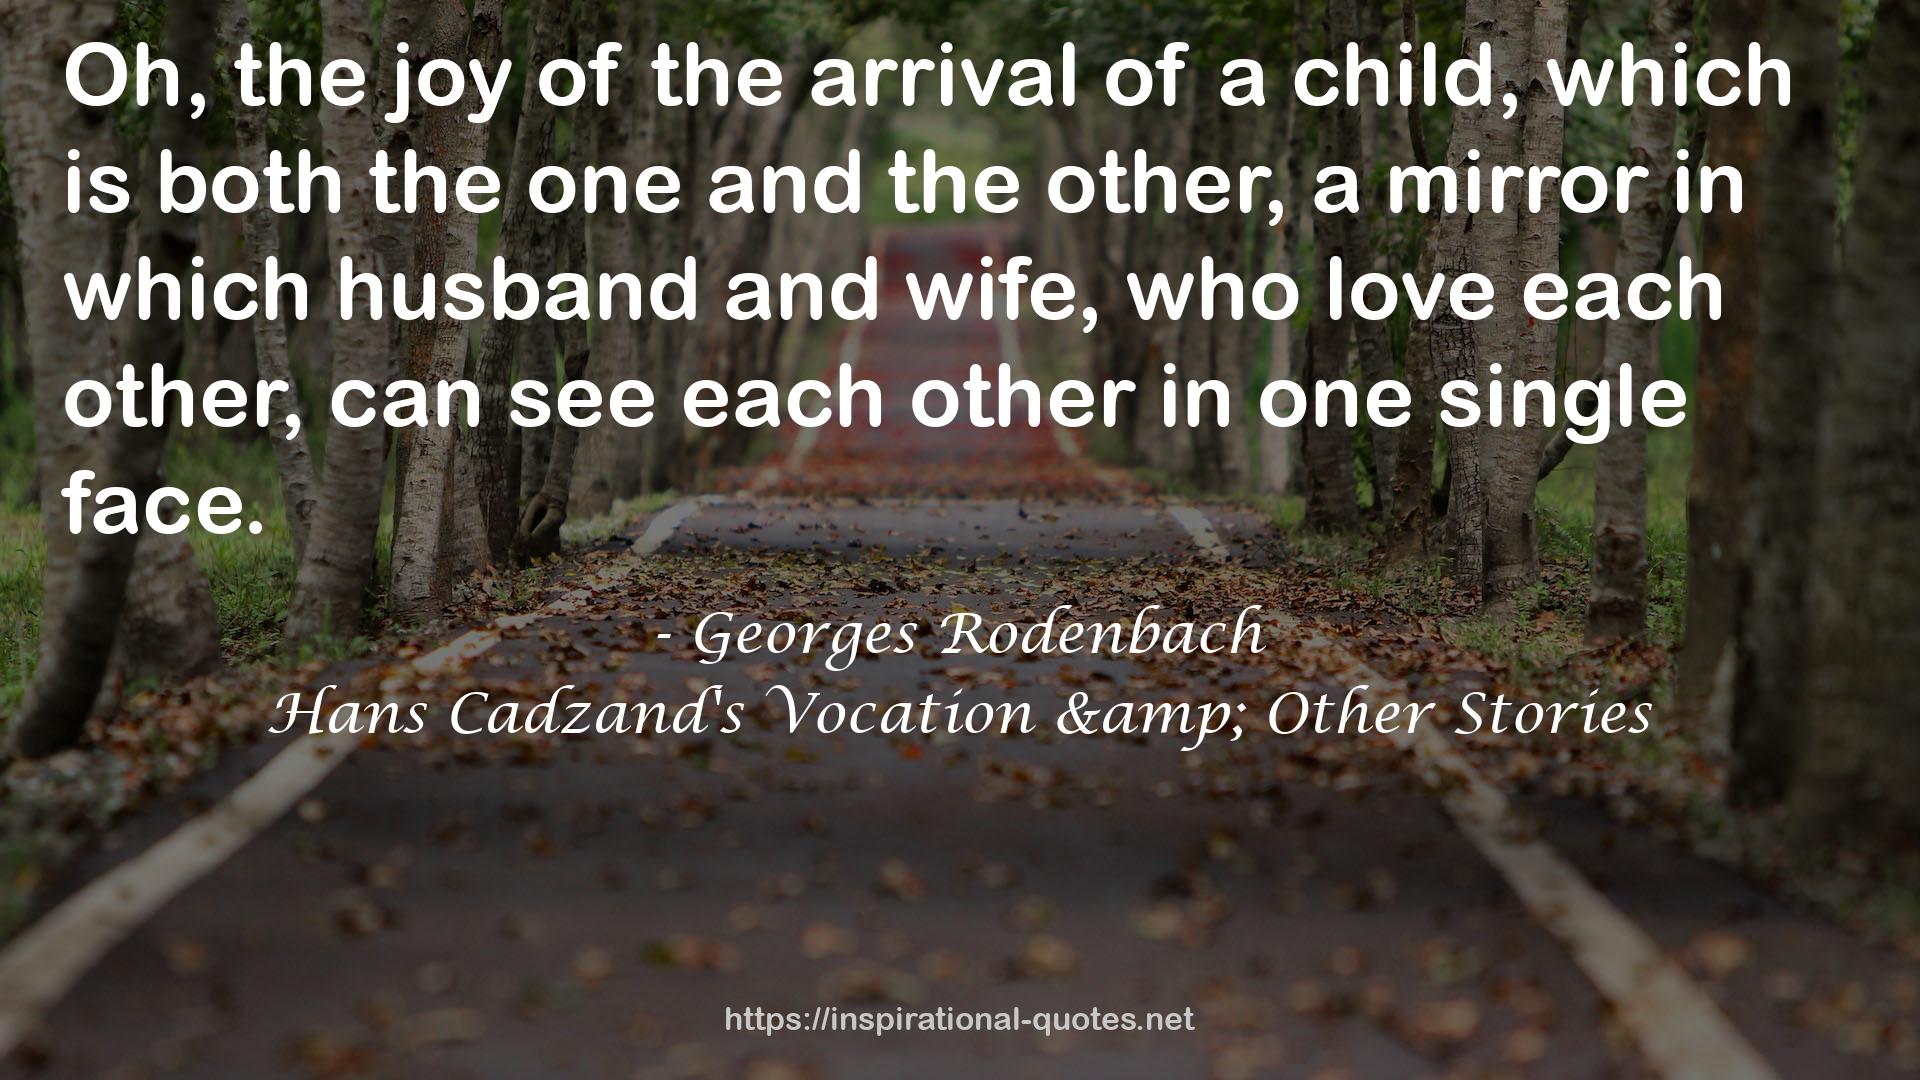 Hans Cadzand's Vocation & Other Stories QUOTES